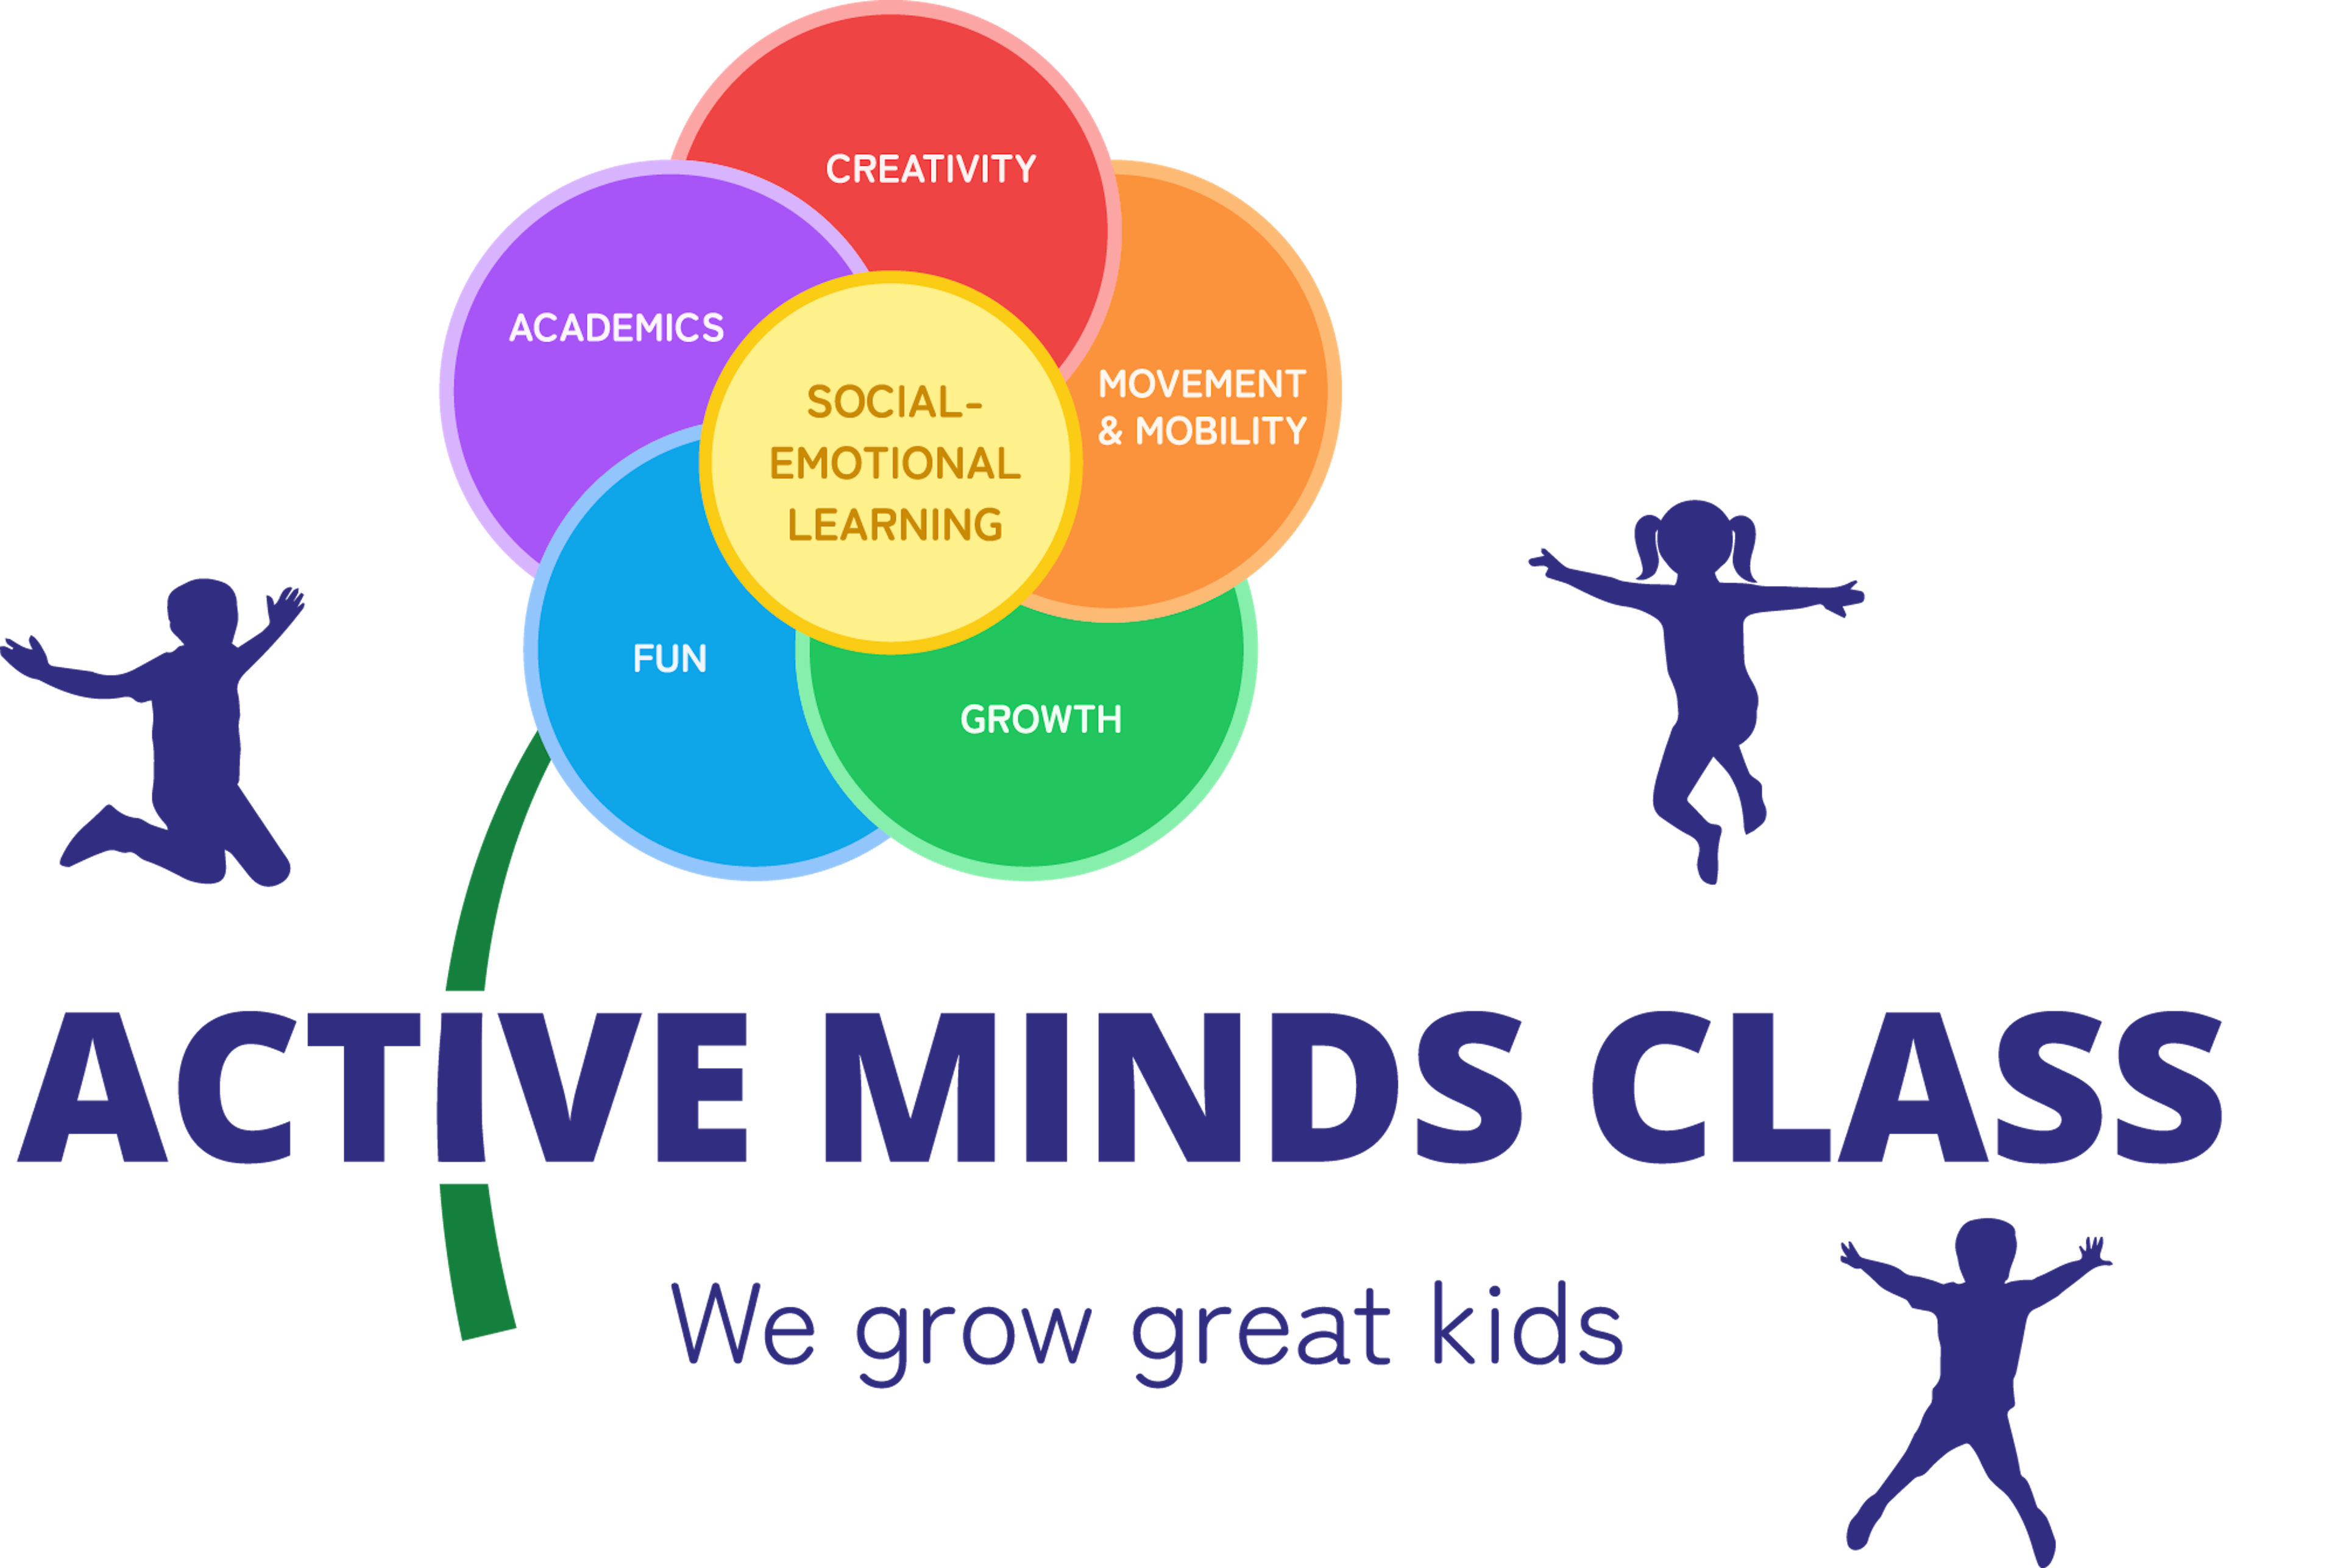 The Active Minds Class flower logo and title